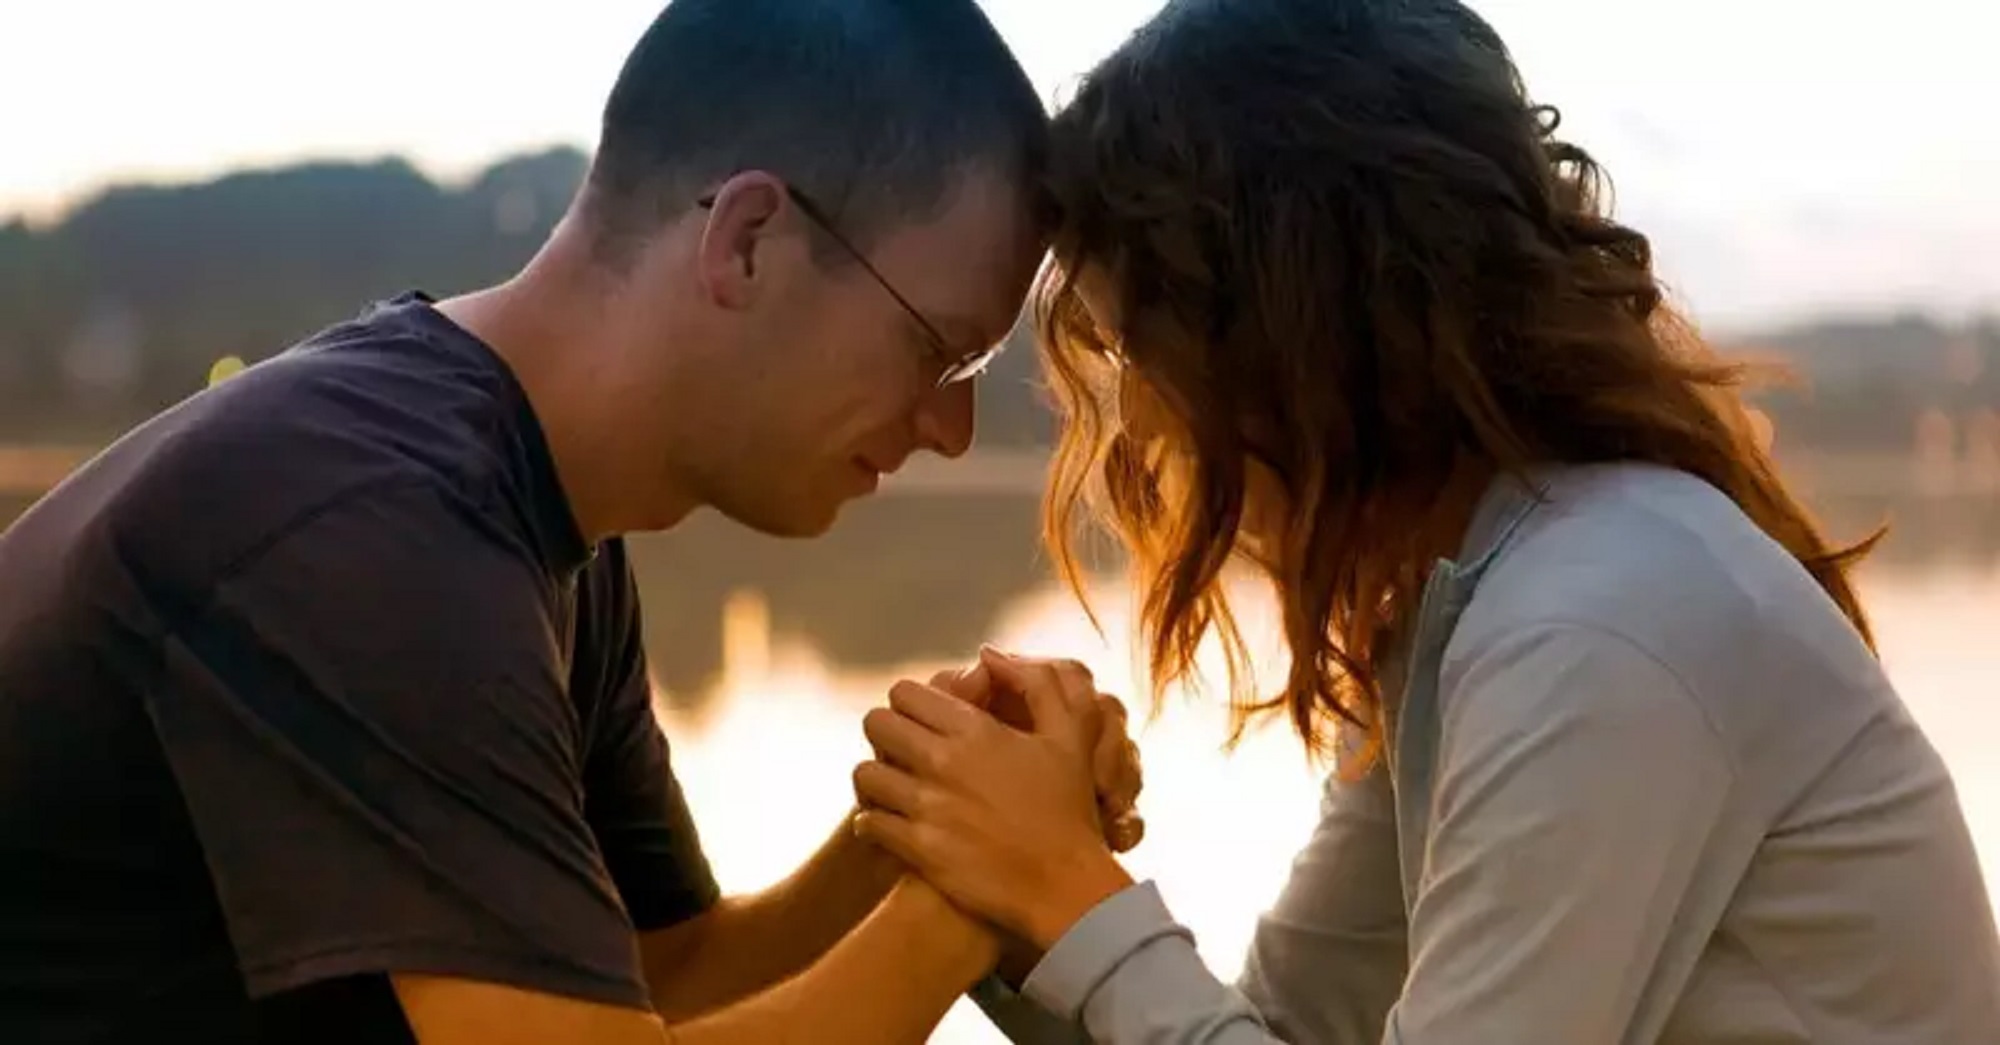 10 Ways to Focus on Making Marriage Holy (Not Just Happy)